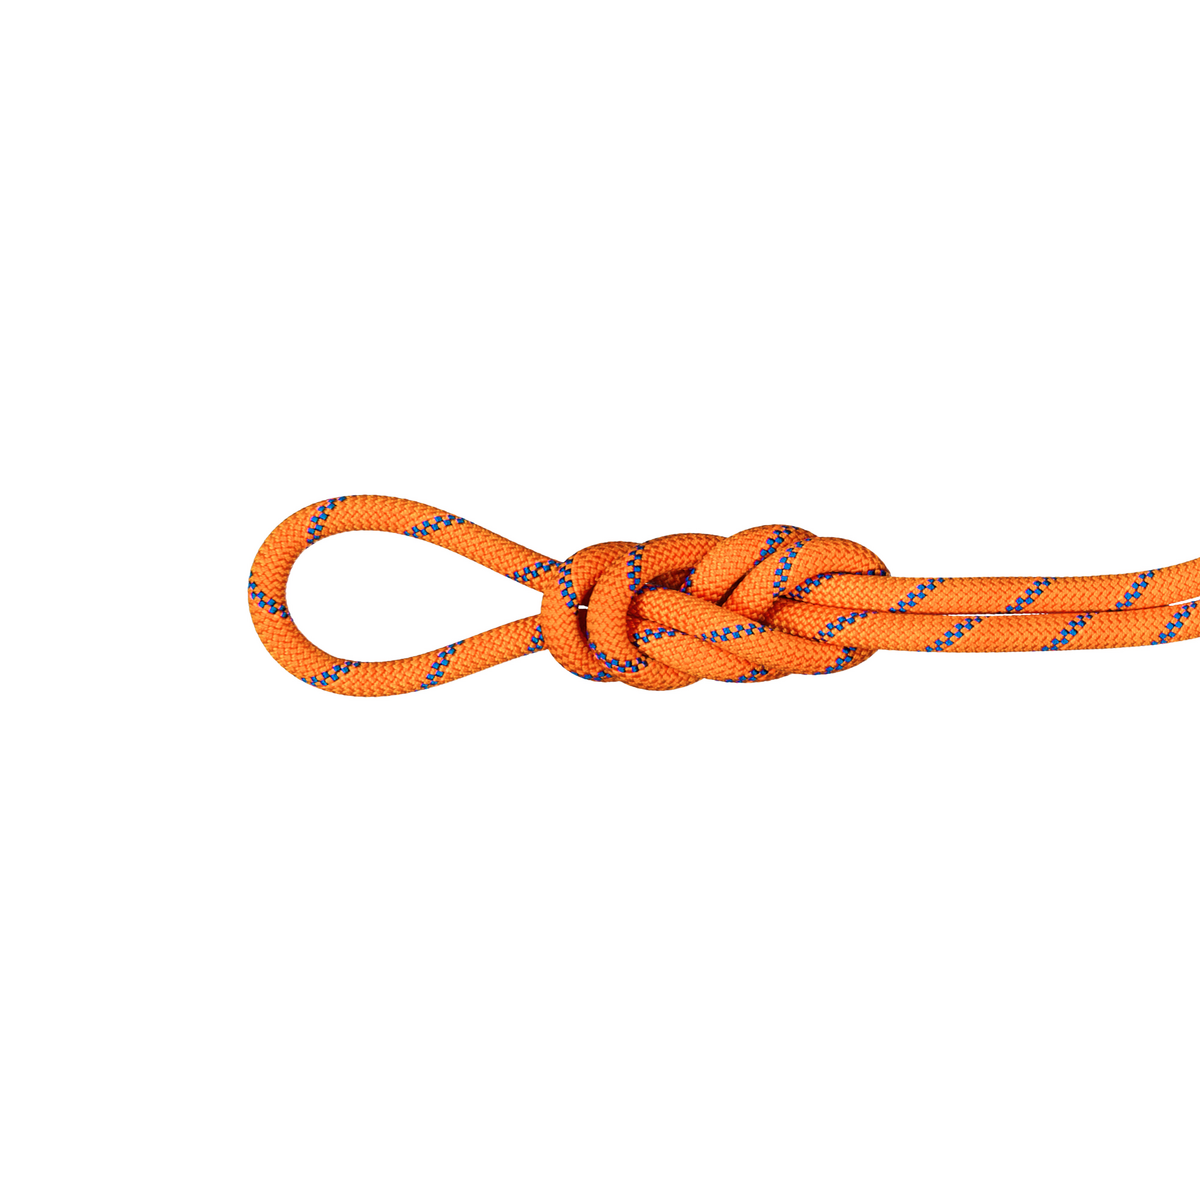 mountaineering rope